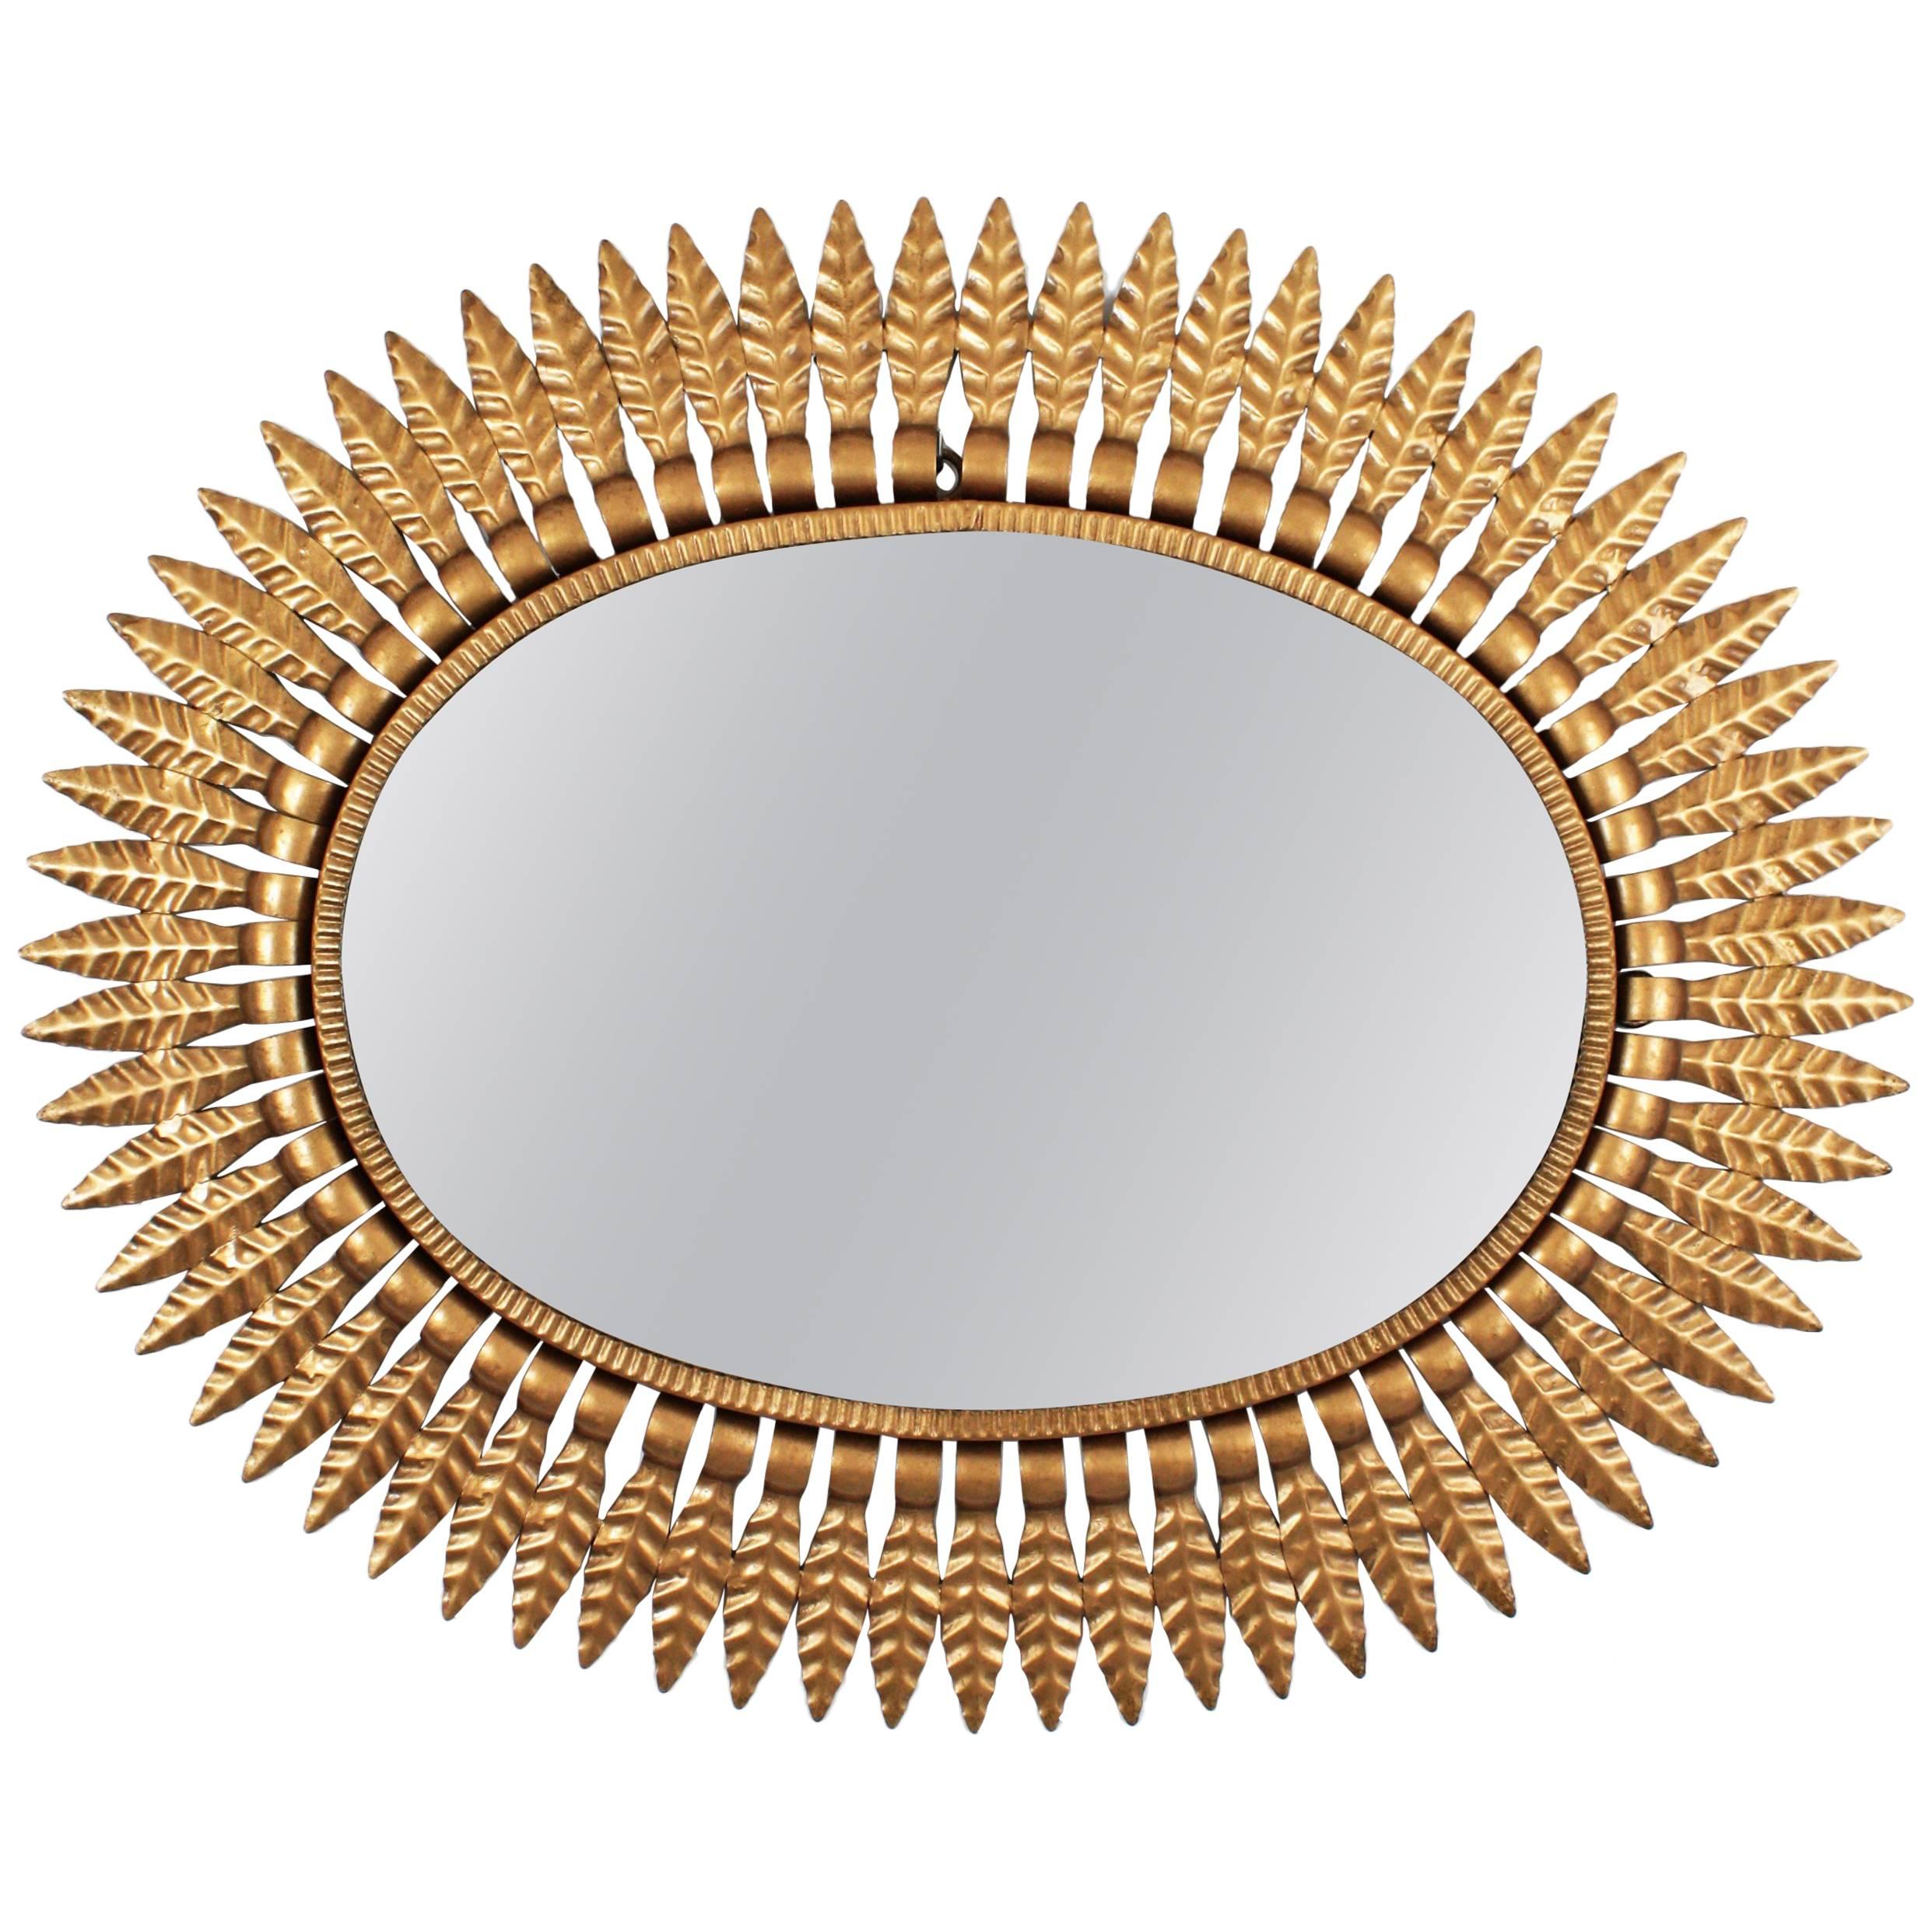 A Hollywood Regency style oval sunburst mirror framed with gilt metal leaves, Spain, 1950s.
This beautiful sunburst mirror manufactured at the mid-20th century period can be placed in two positions and it is interesting to place alone or creating a